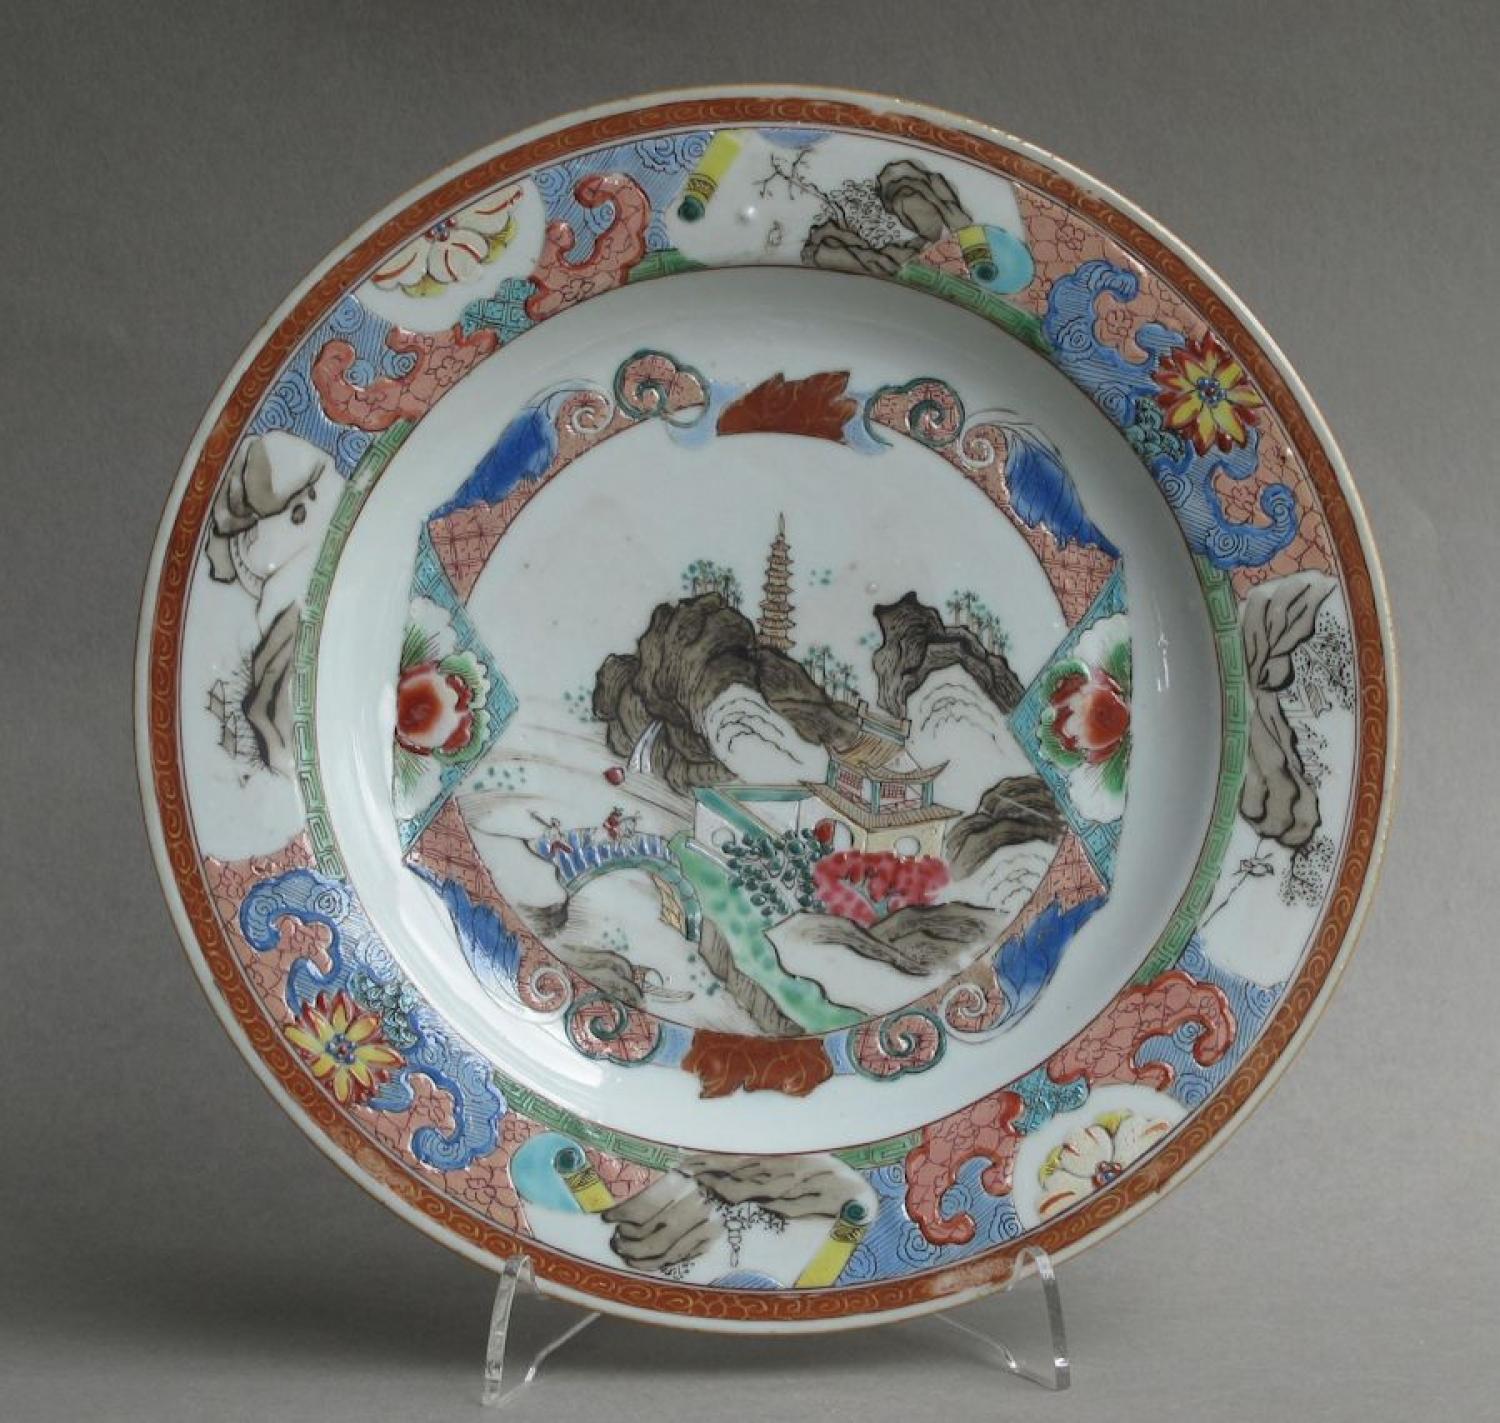 Chinese famille rose plate c 1740-50